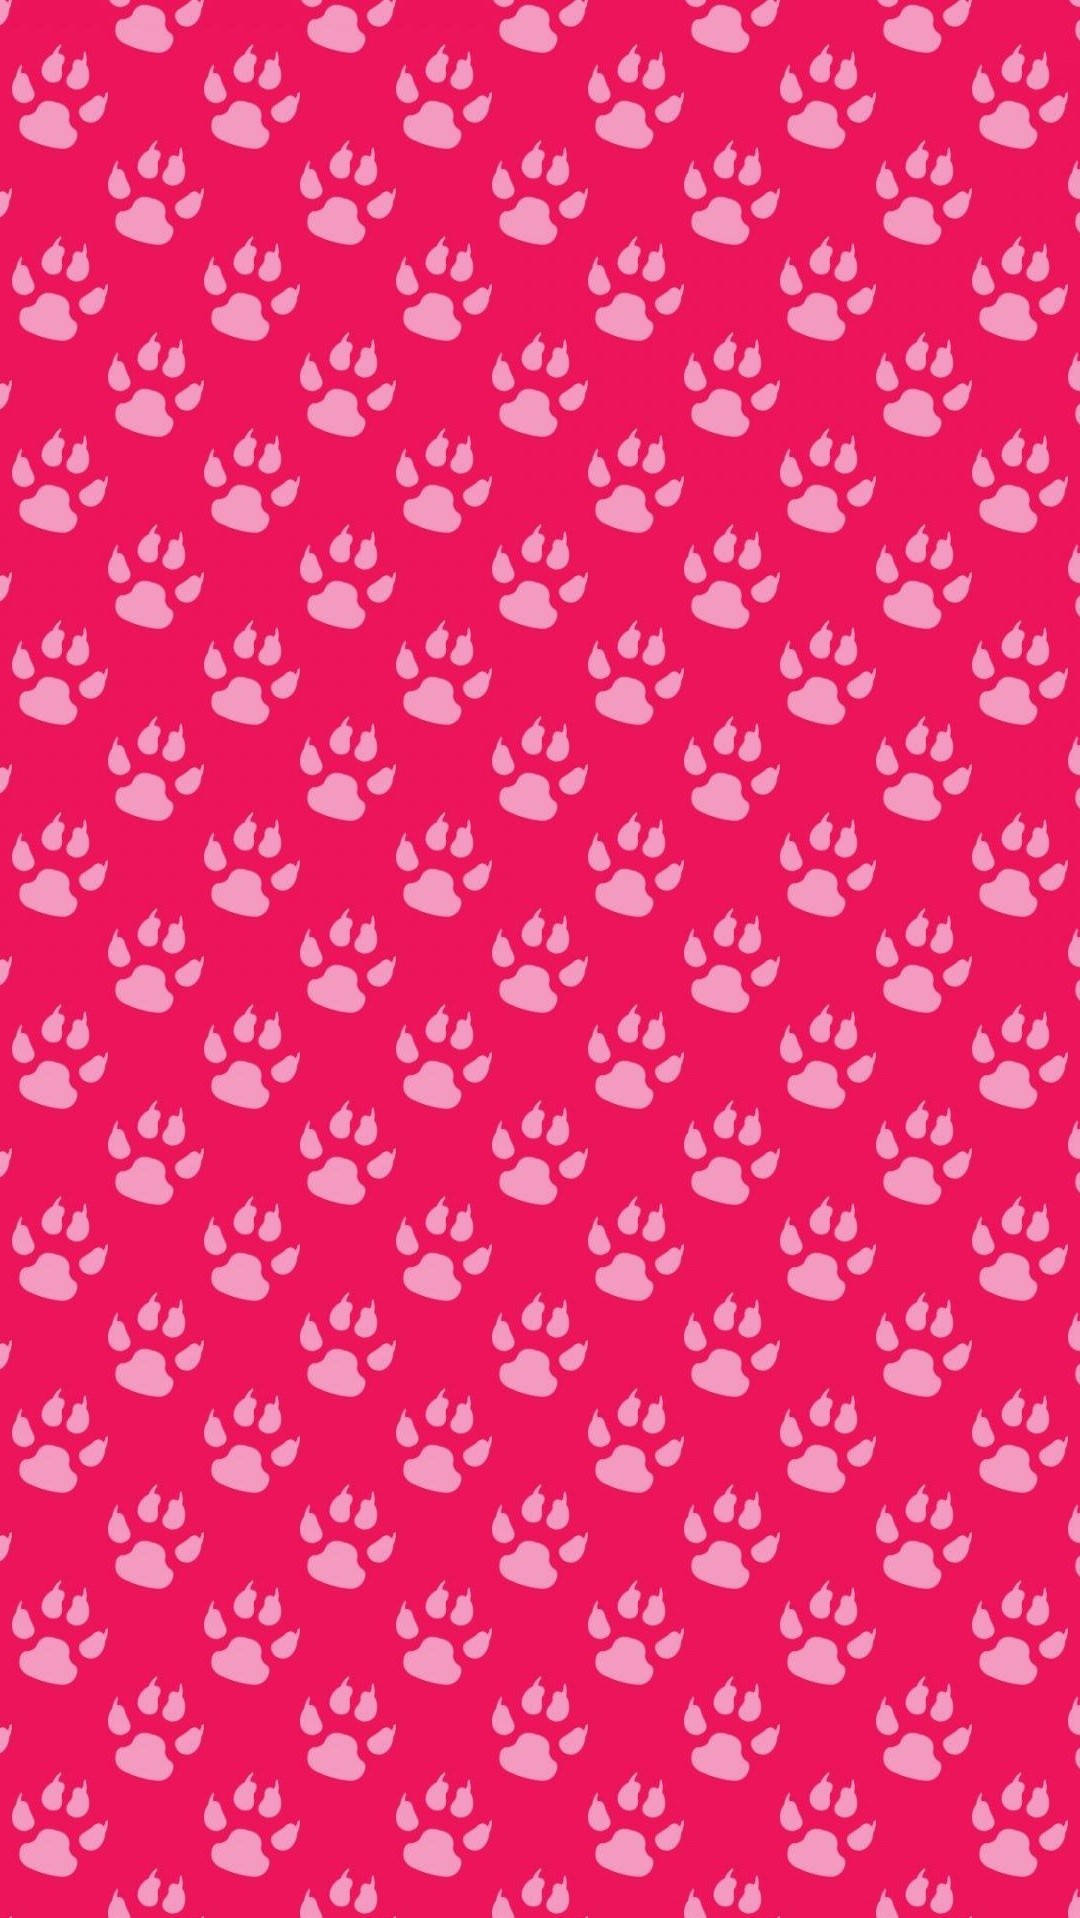 Adorable Pink Paw Prints Background